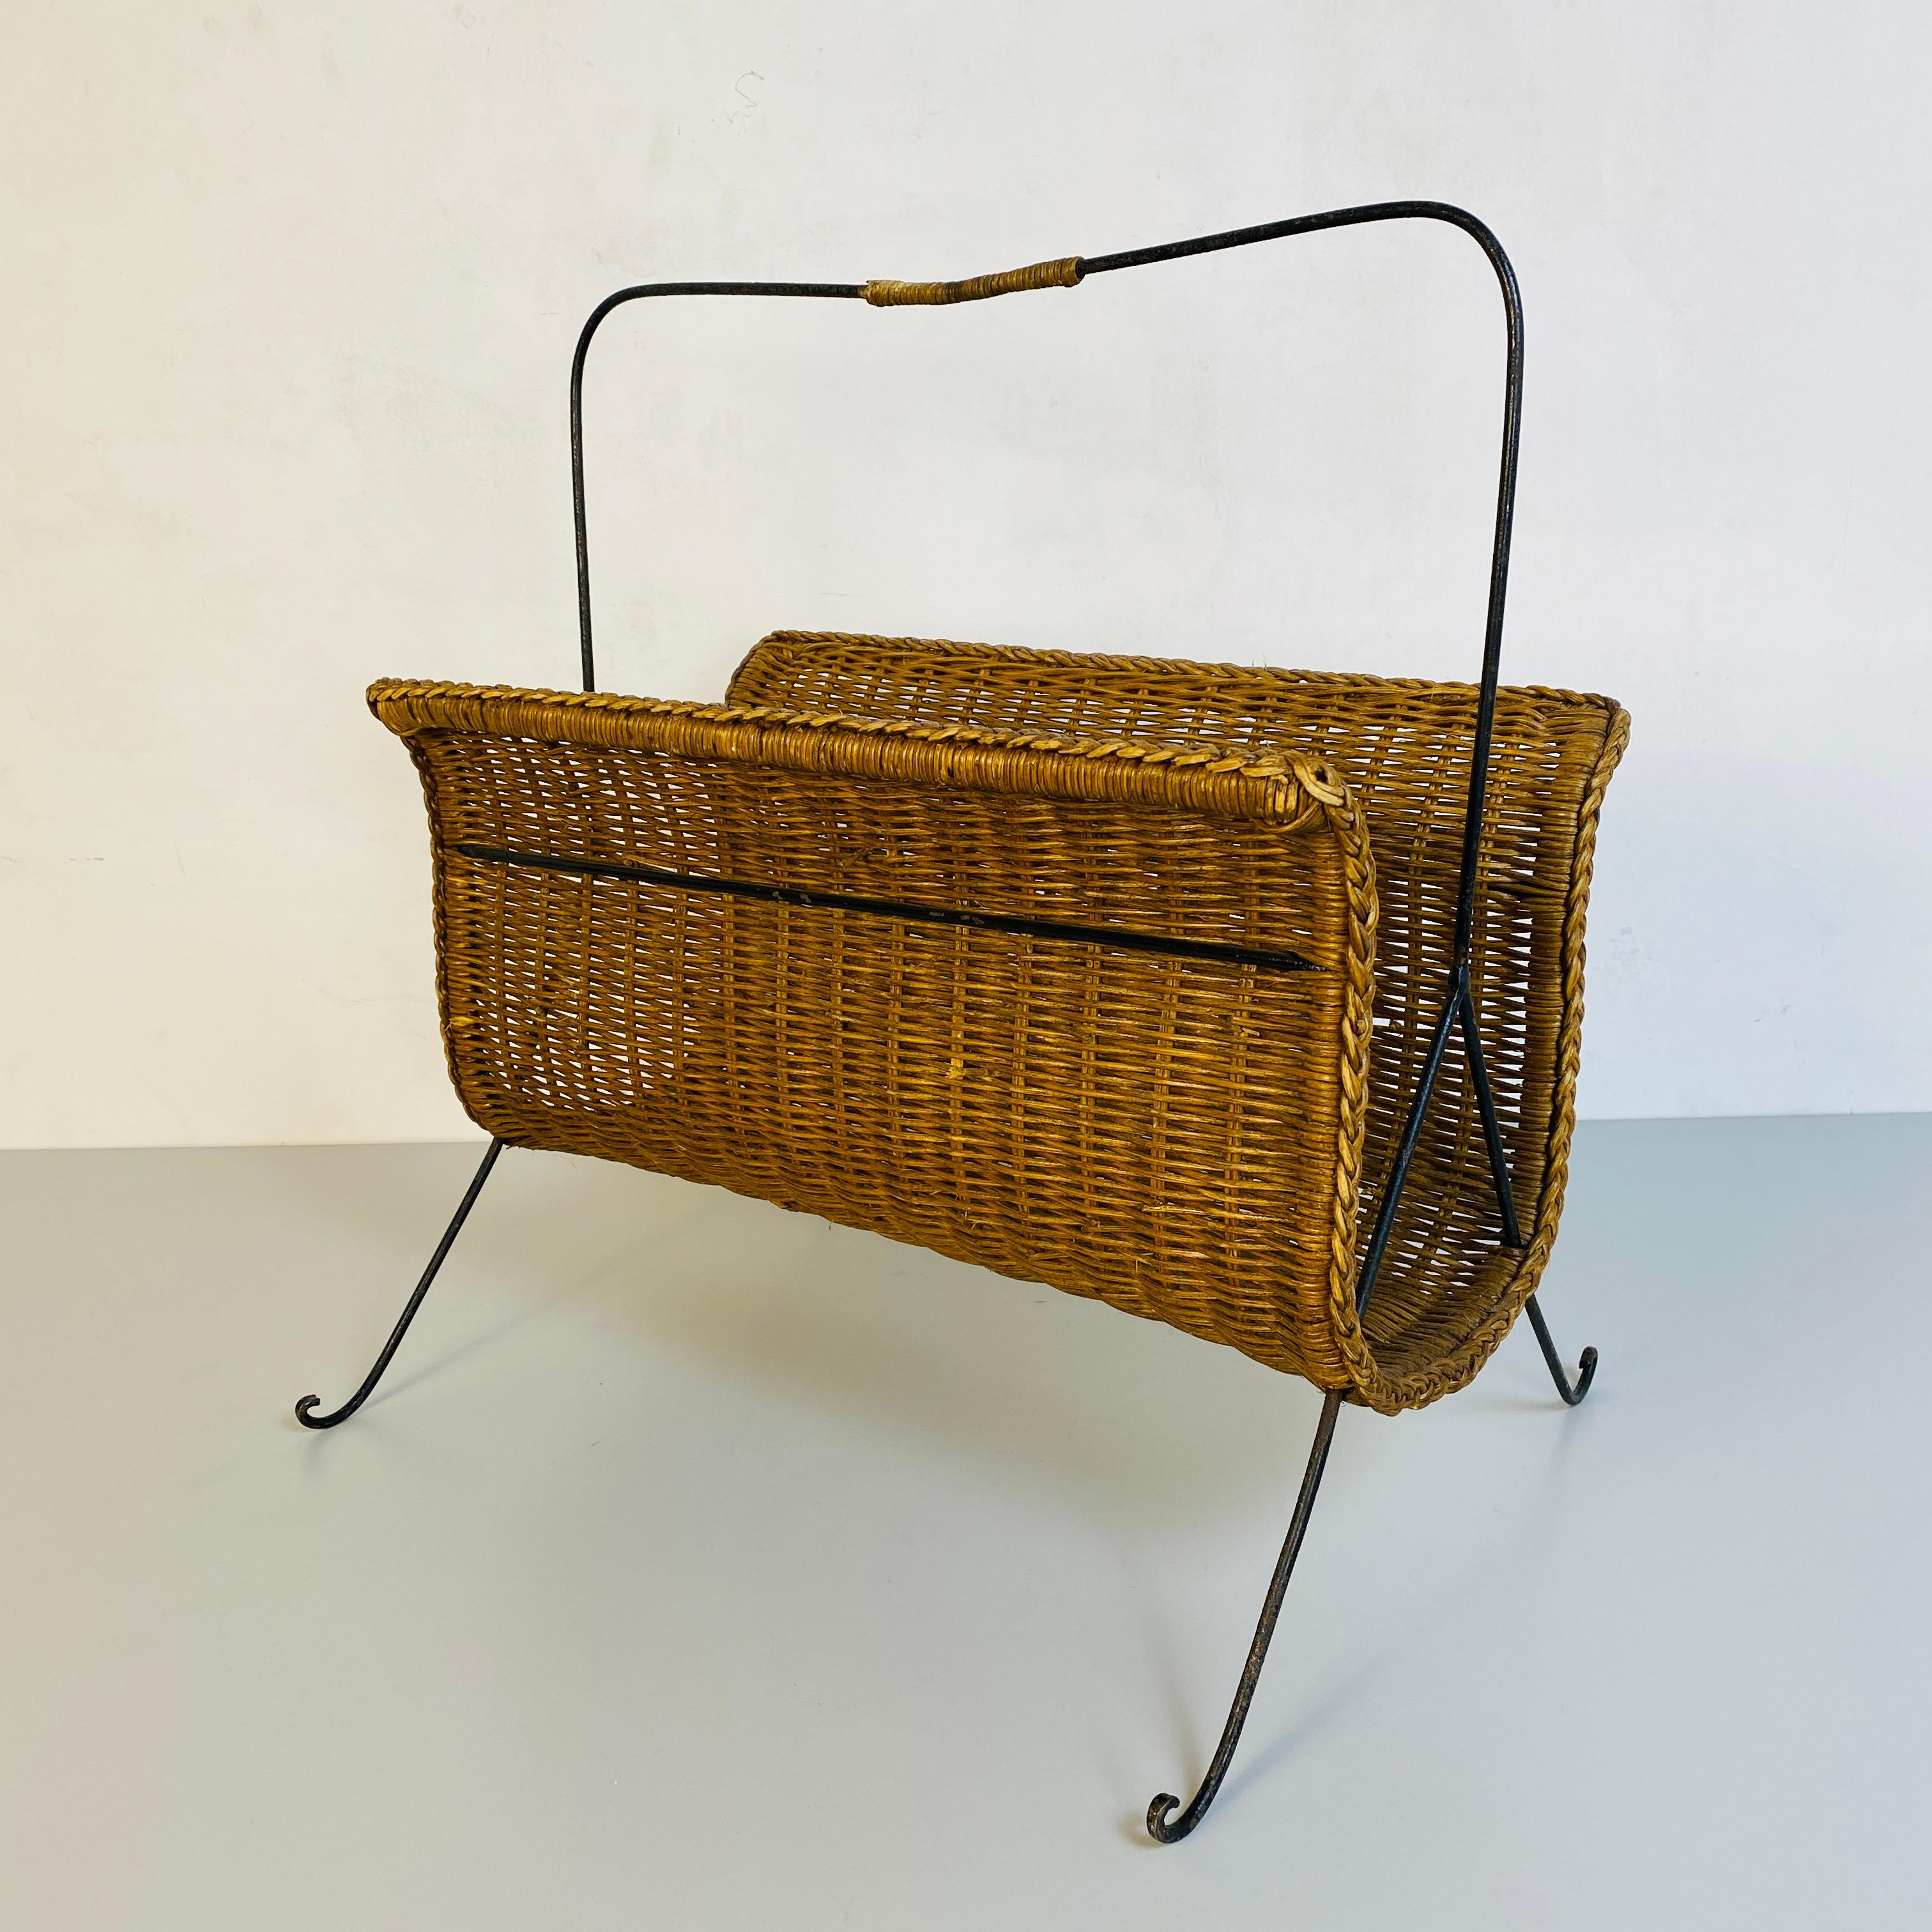 Italian Mid-Century Modern straw magazine rack with metal structure, 1970s
Magazine rack with wrought iron and straw structure.
Perfect for indoor and outdoor
Good condition, defects in some places.

The measures are in cm 52 x 30 x 55H.

If you are